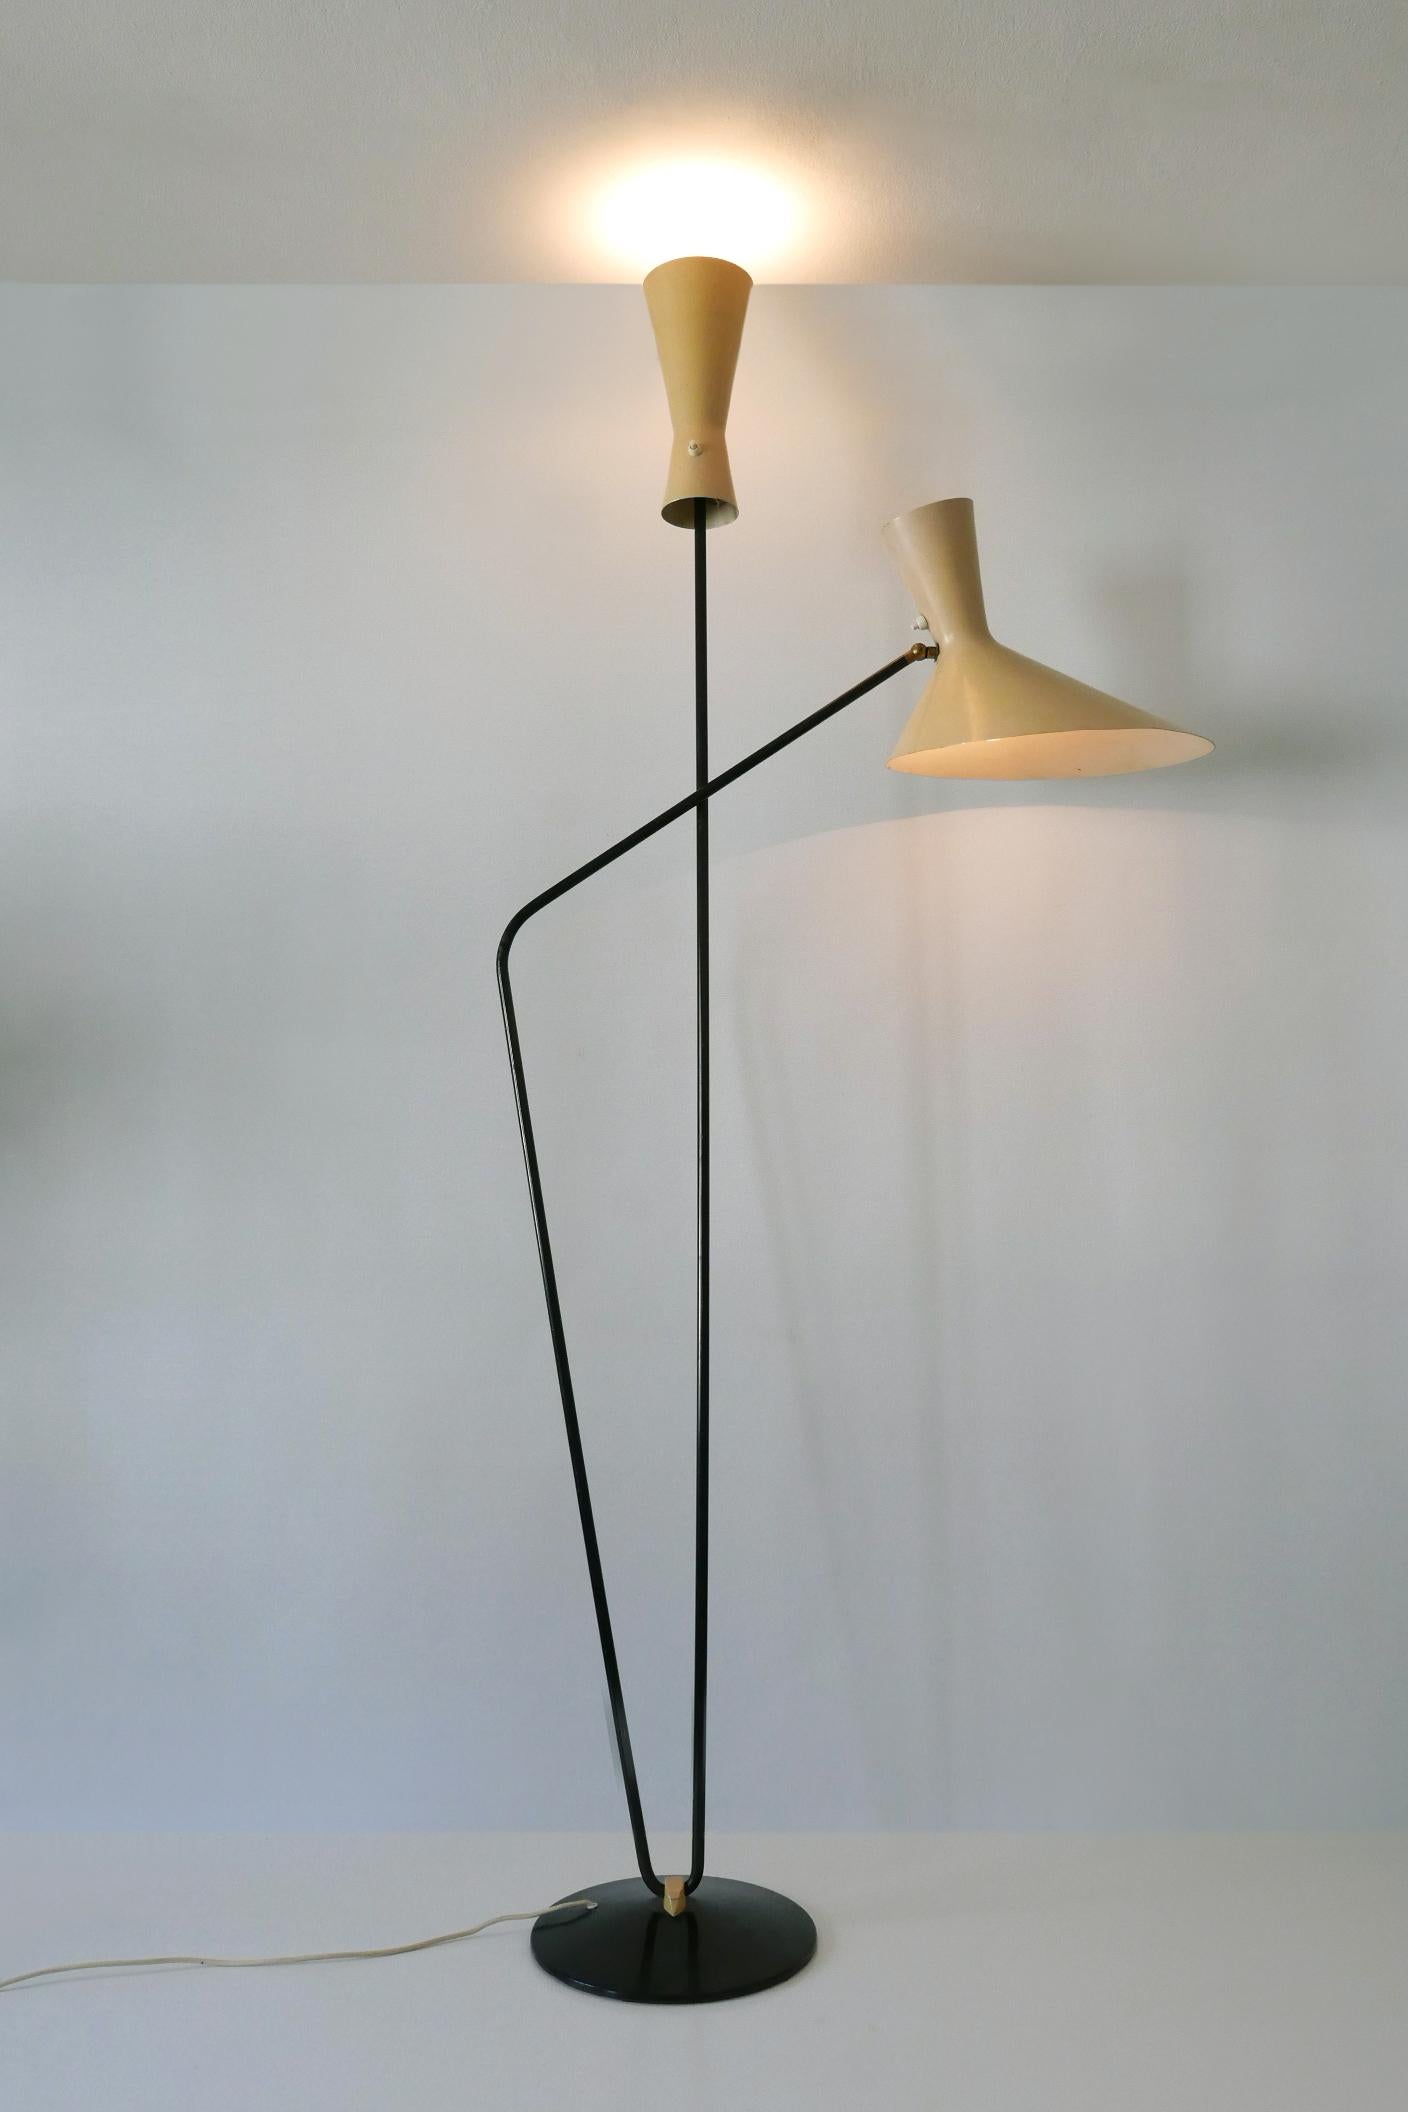 Enameled Rare Iconic Mid-Century Modern Floor Lamp by Prof. Carl Moor for BAG Turgi 1950s For Sale